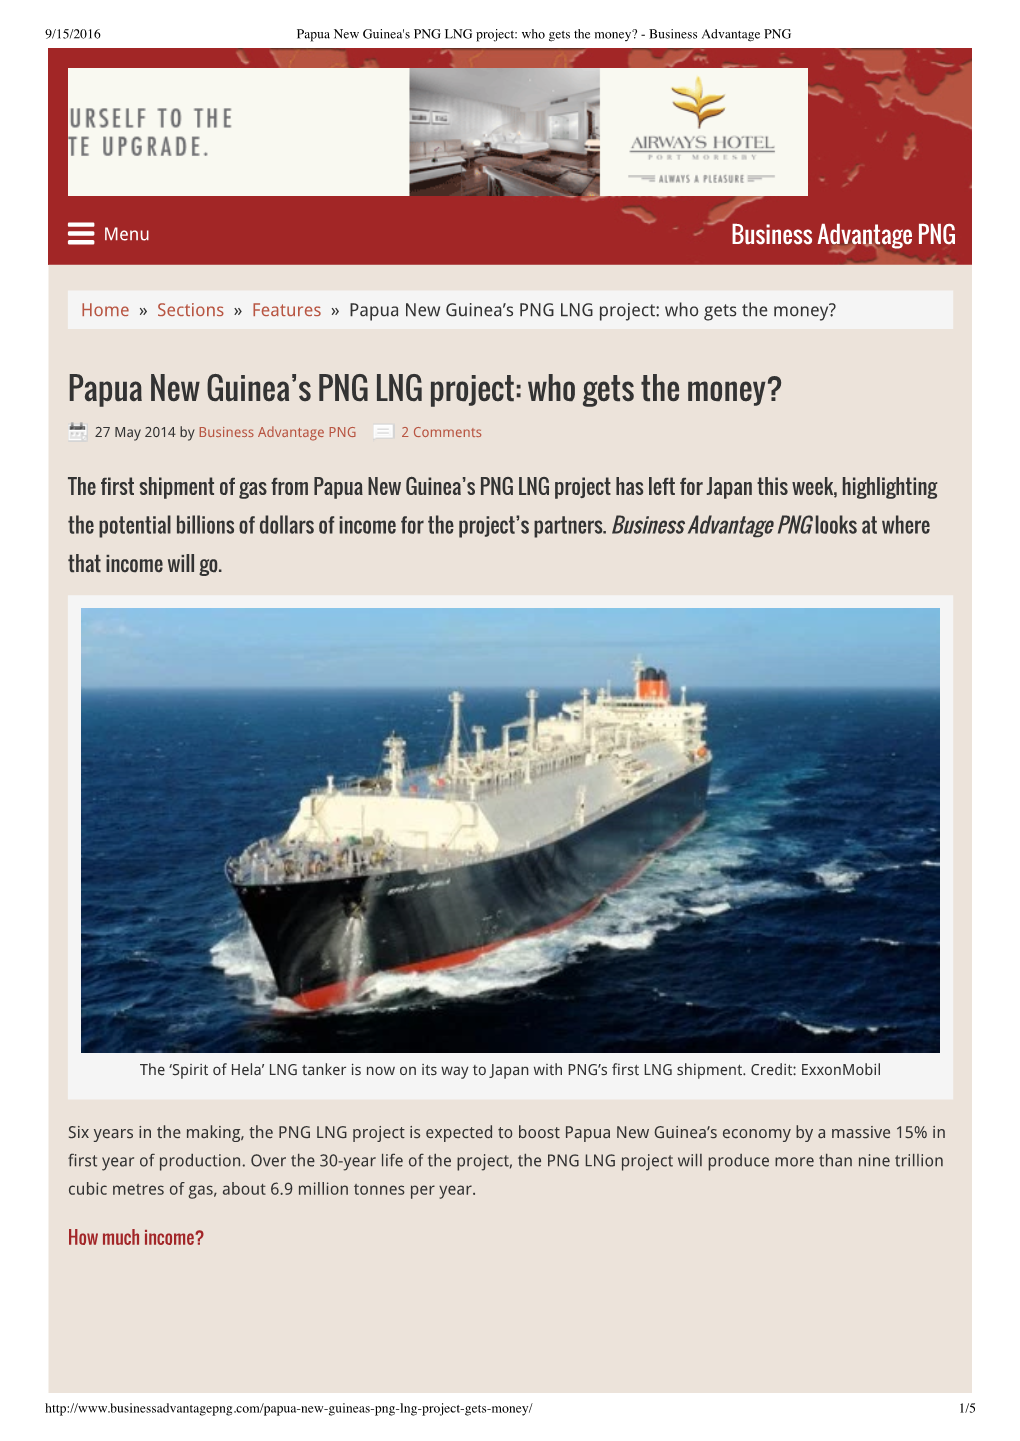 Papua New Guinea's PNG LNG Project: Who Gets the Money? - Business Advantage PNG